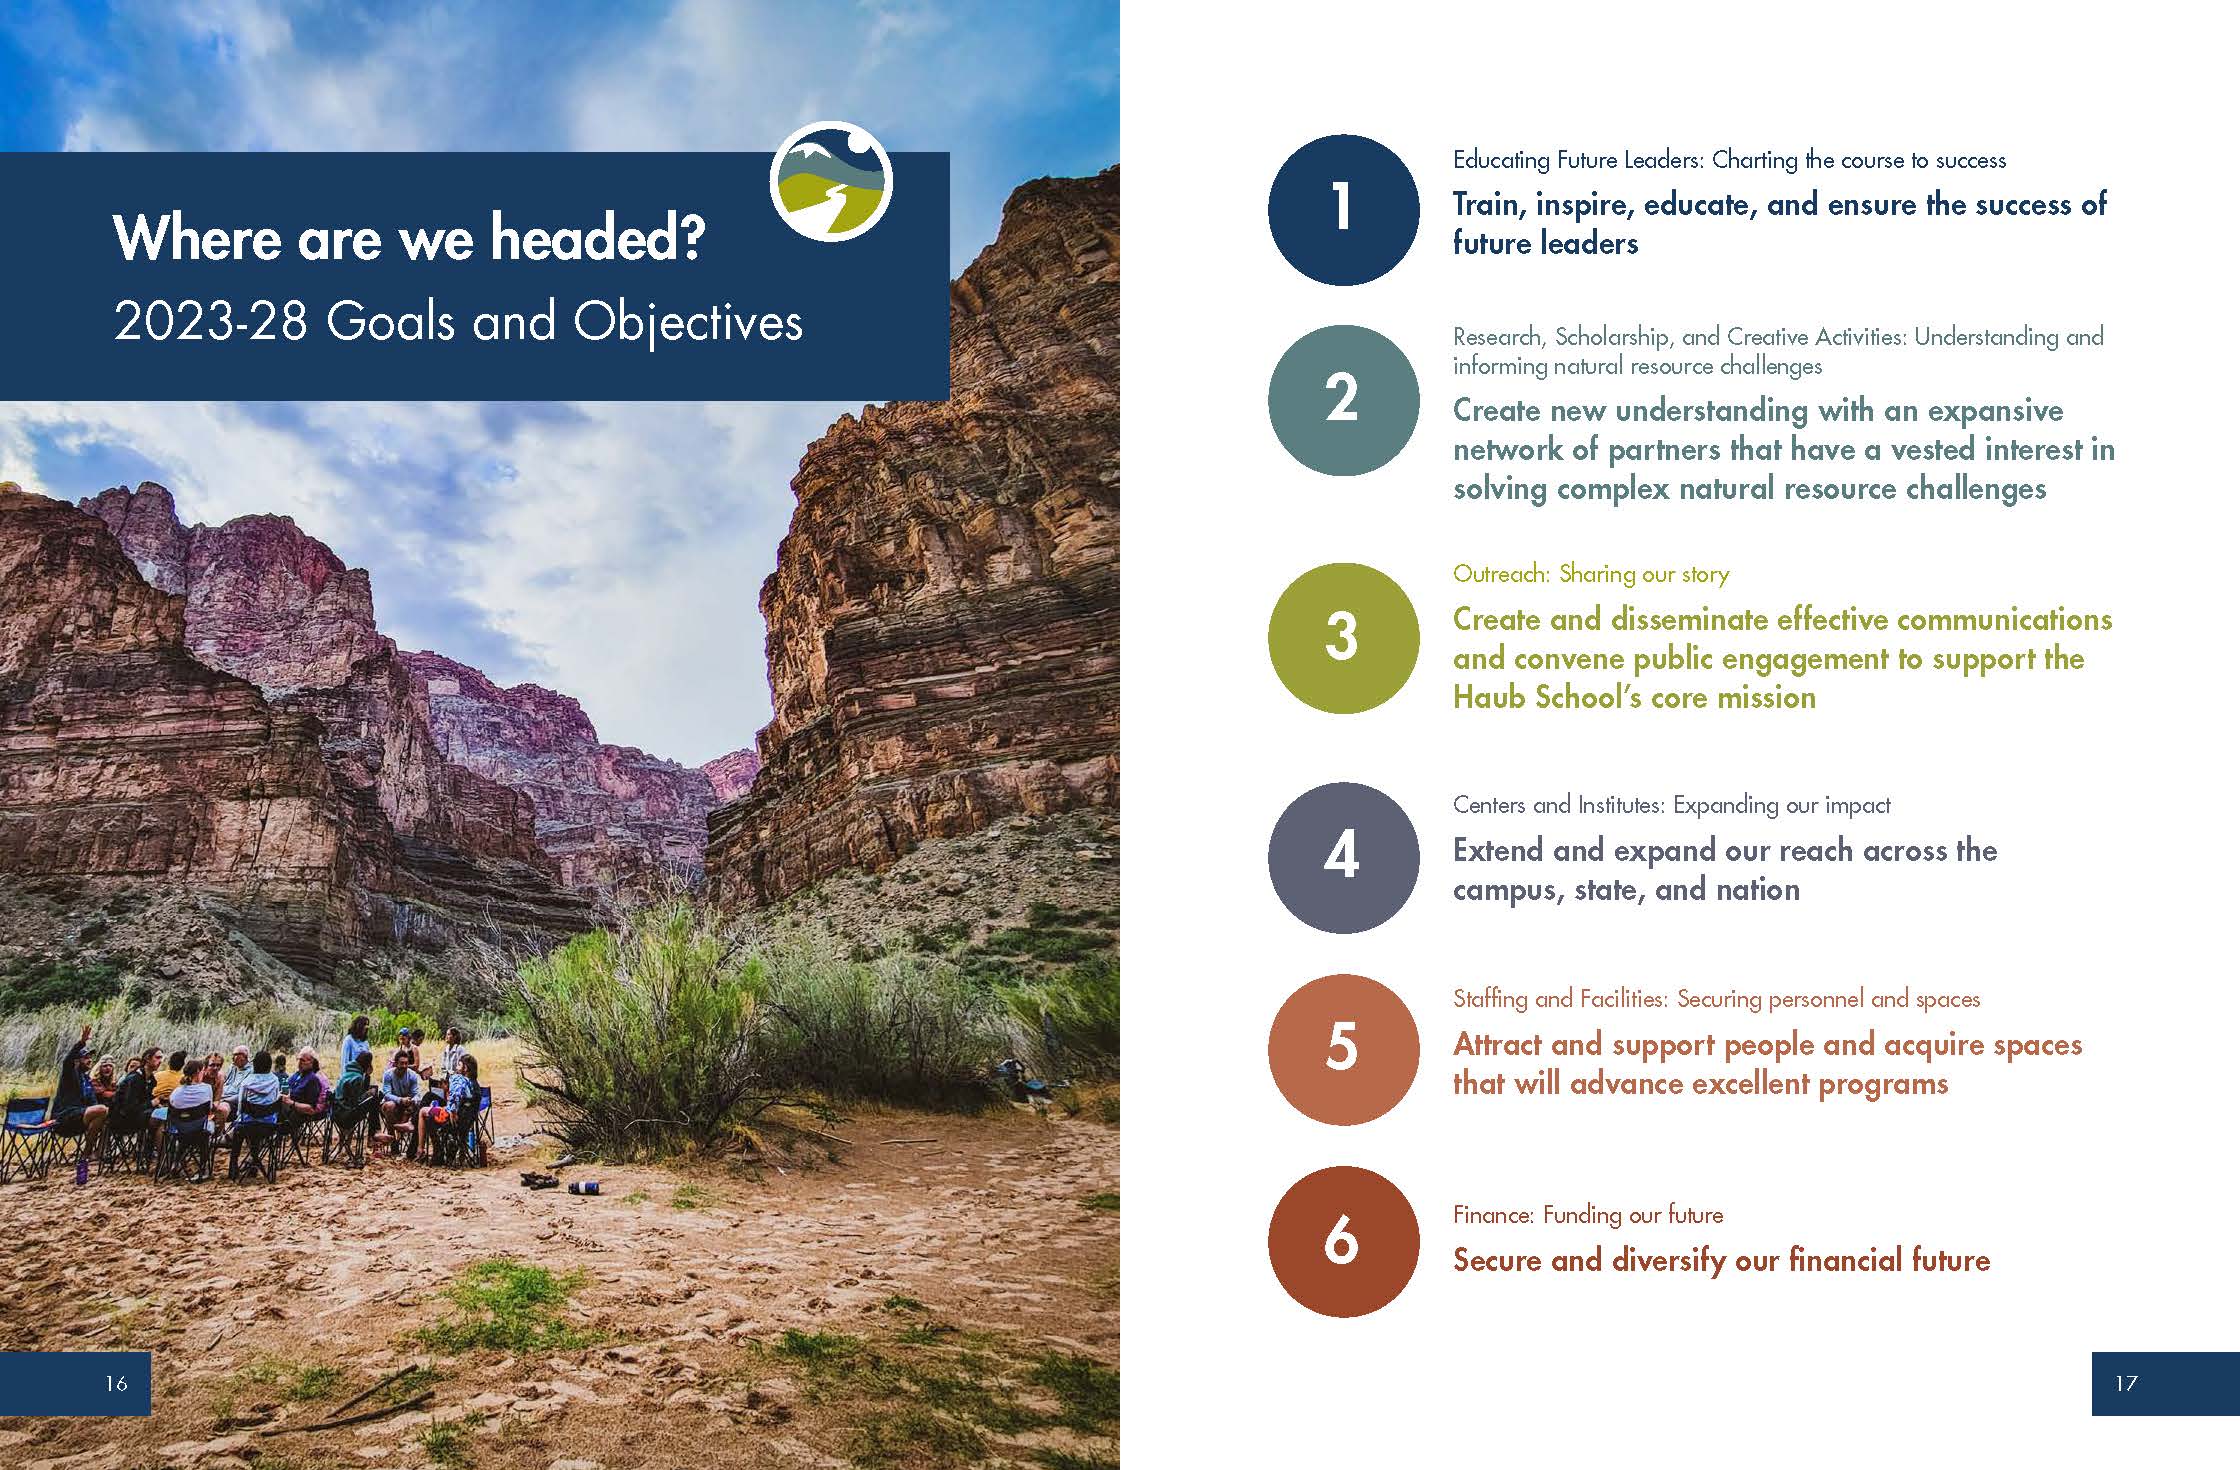 Excerpt from strategic plan that shows a field course on the grand canyon and 6 color-coded priorities for the future